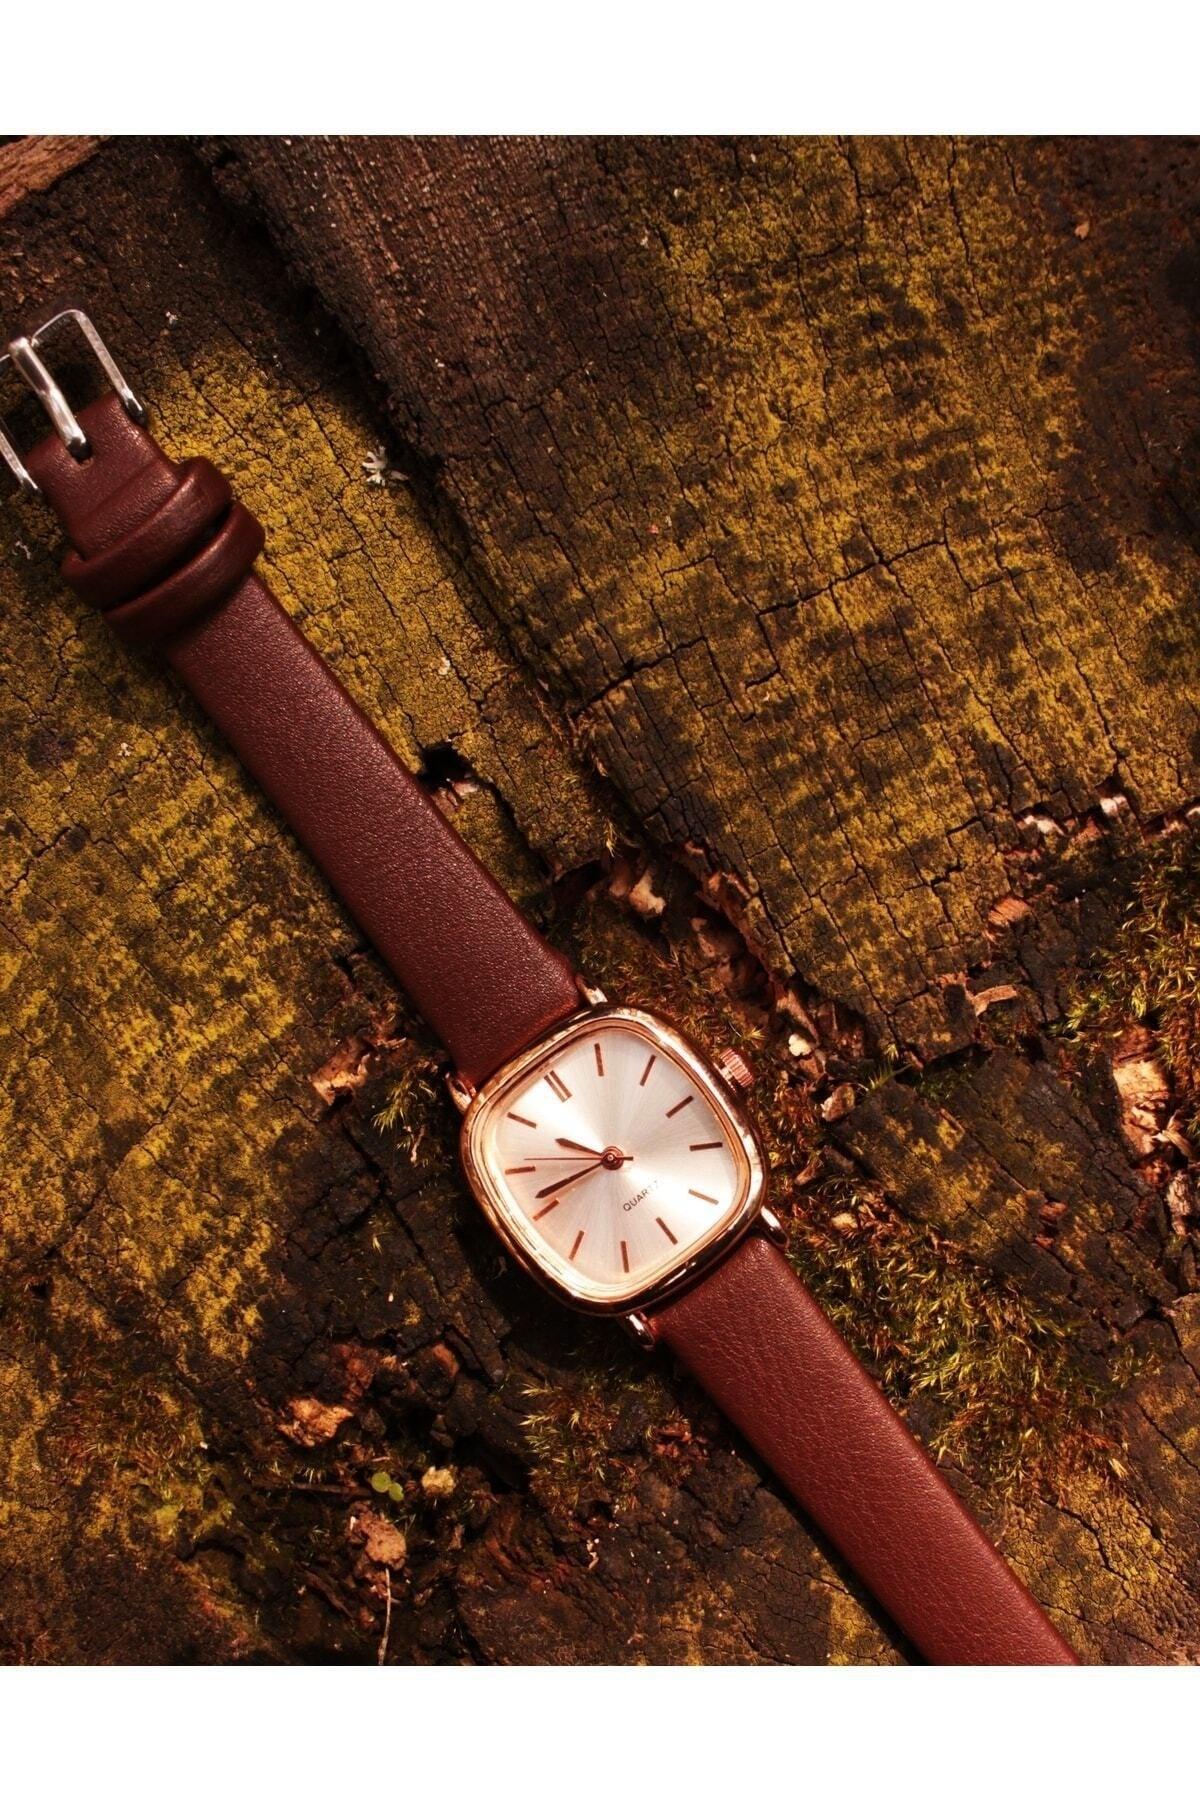 Retro Minimal Women's Wristwatch With Brown Leather Band - Swordslife